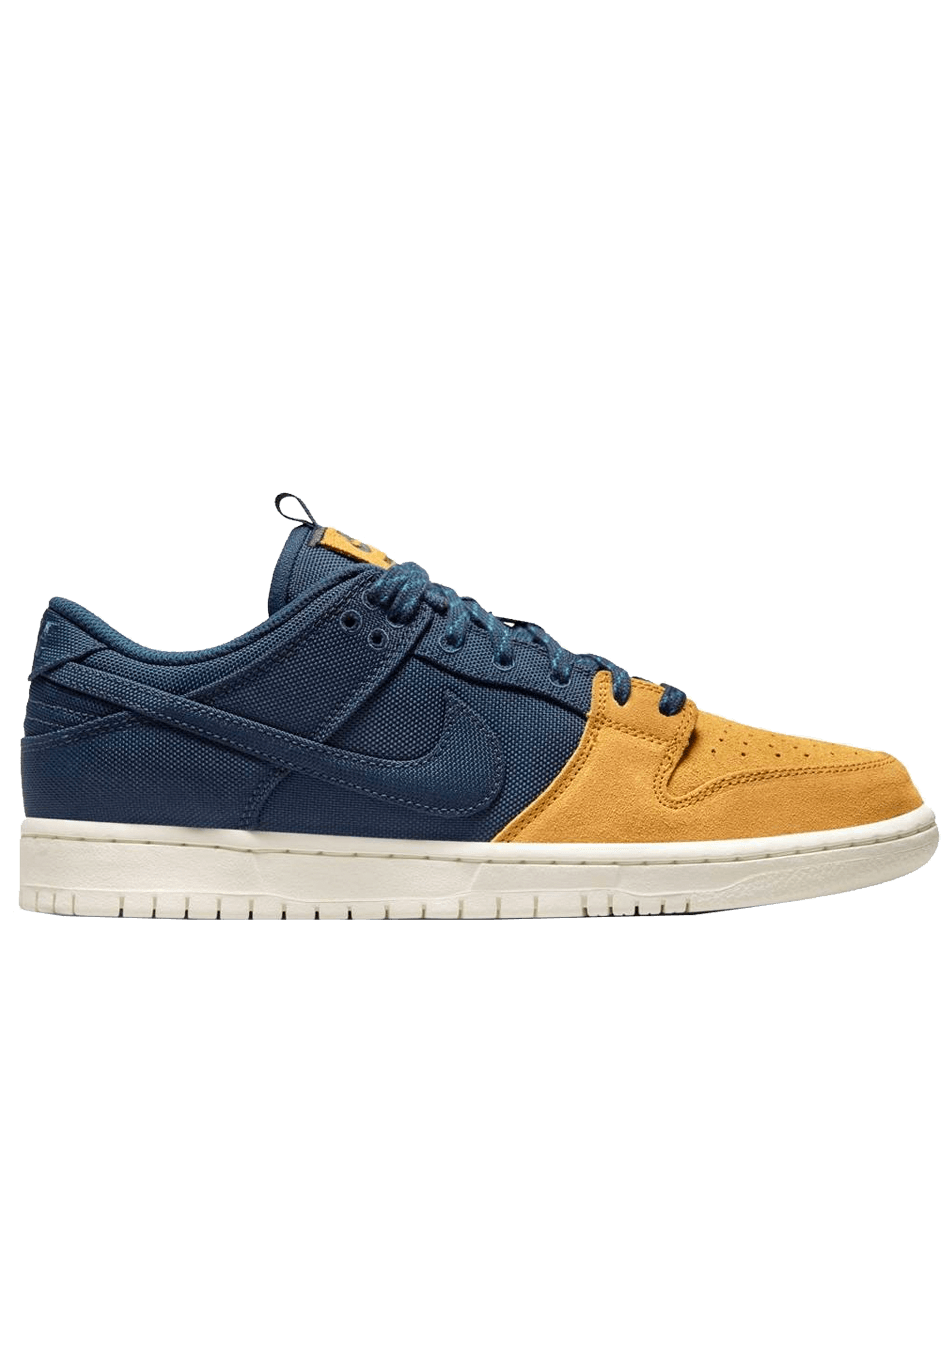 Nike SB Dunk Low Pro 90s Backpack Navy Brown ONLINE ONLY